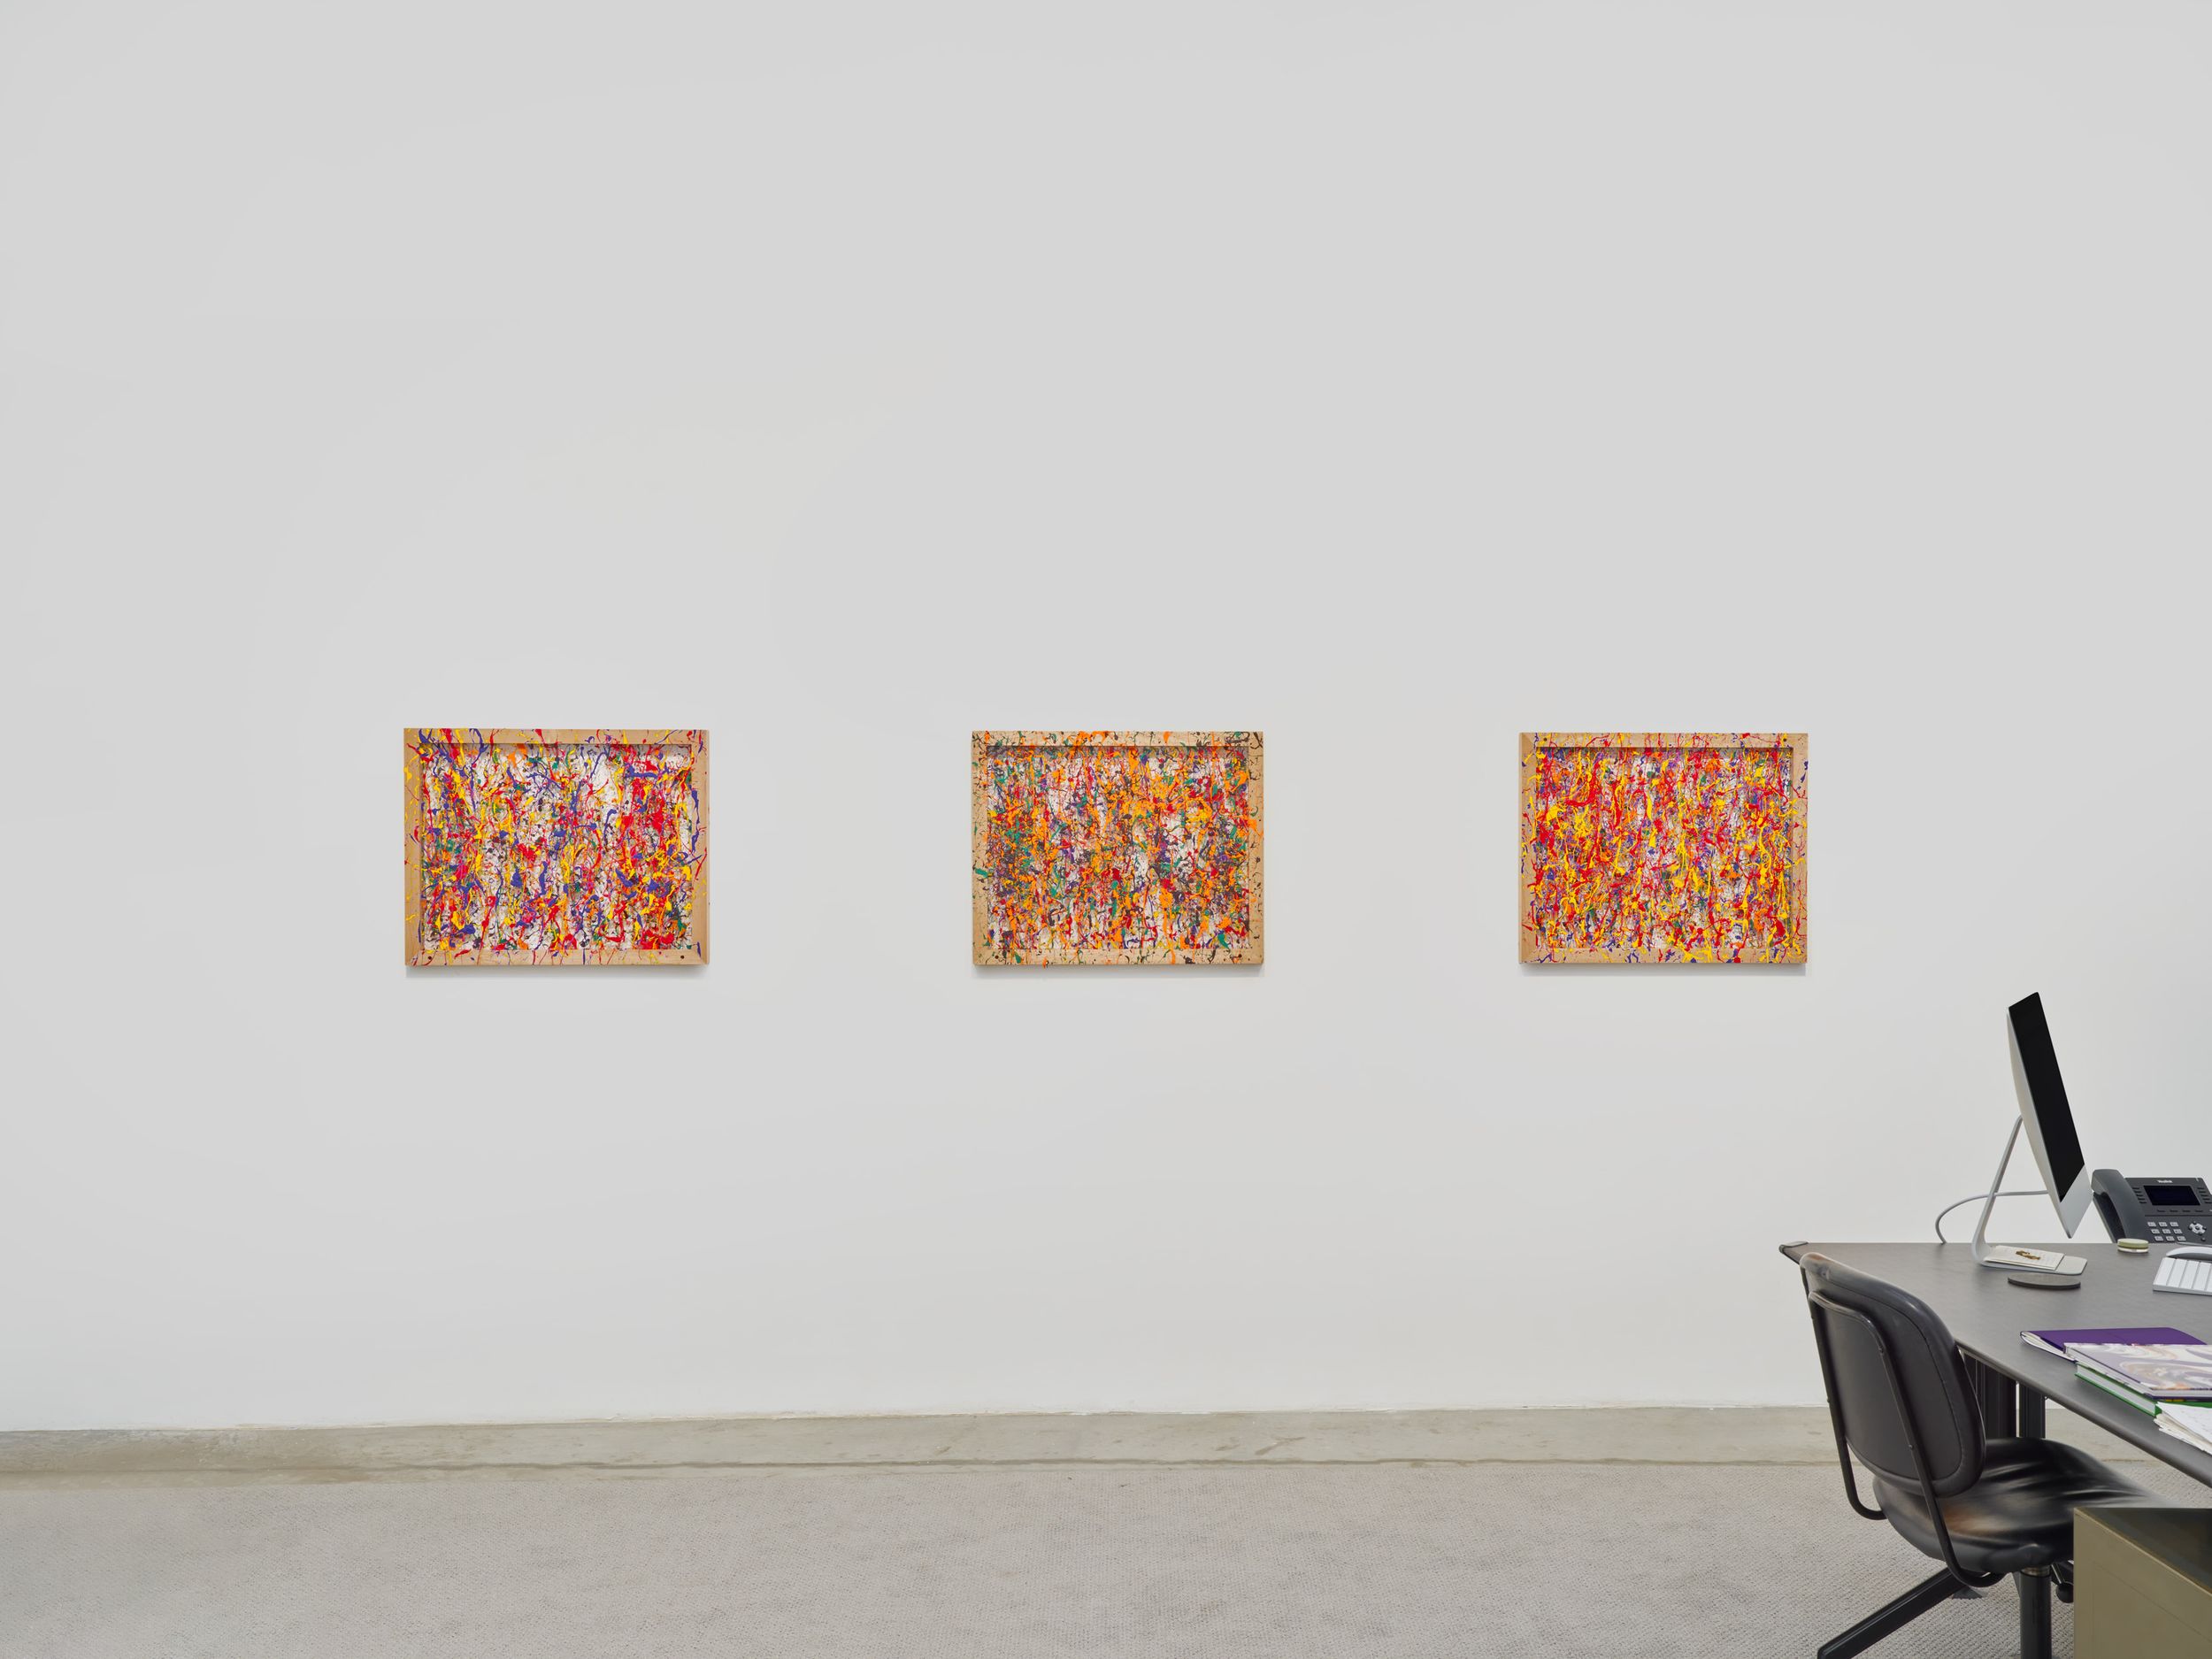 Installation view of Three New Paintings, I Mean Six